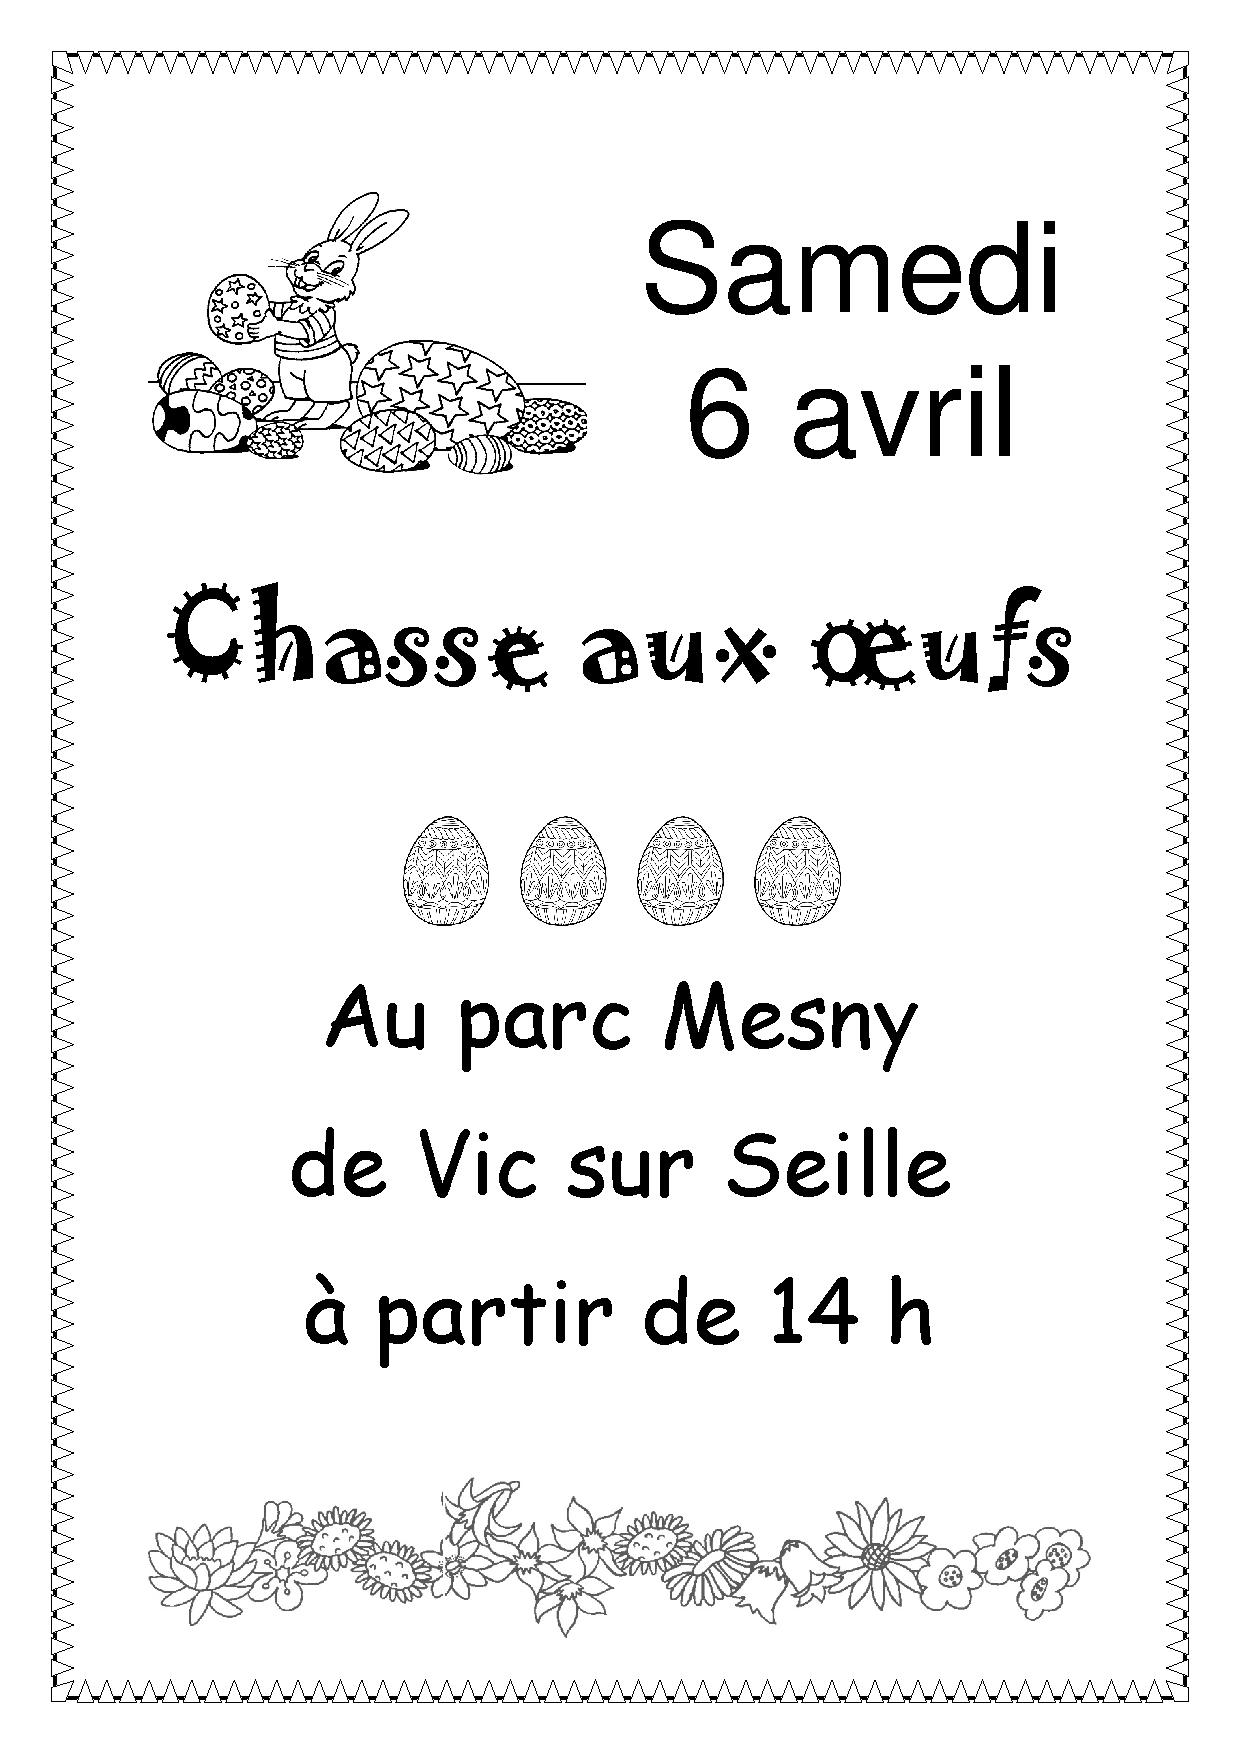 Chasse aux oeufs 06 04 19